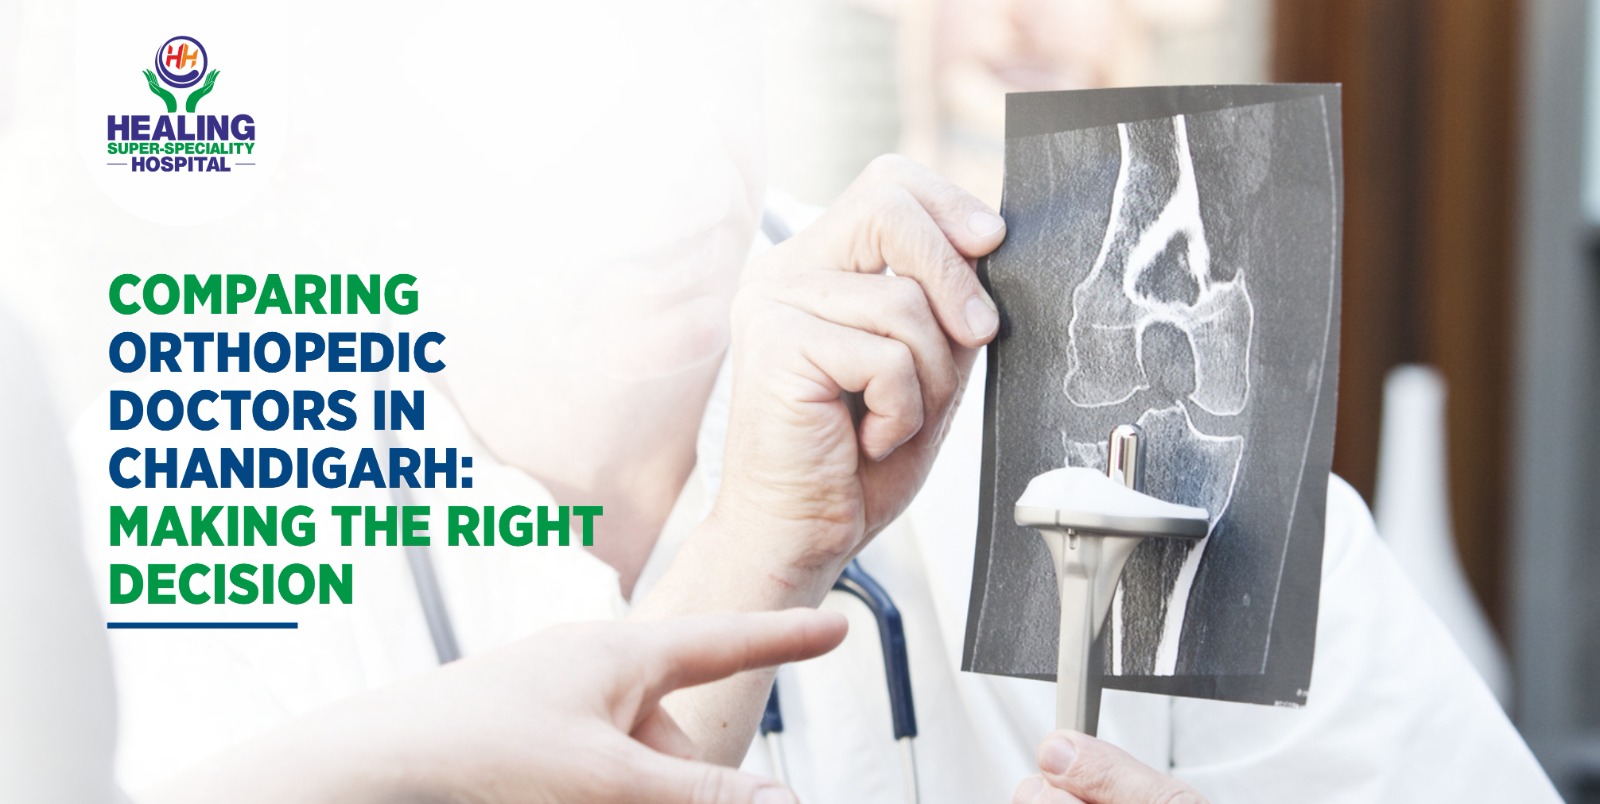 Comparing Orthopedic Doctors in Chandigarh: Making the Right Decision